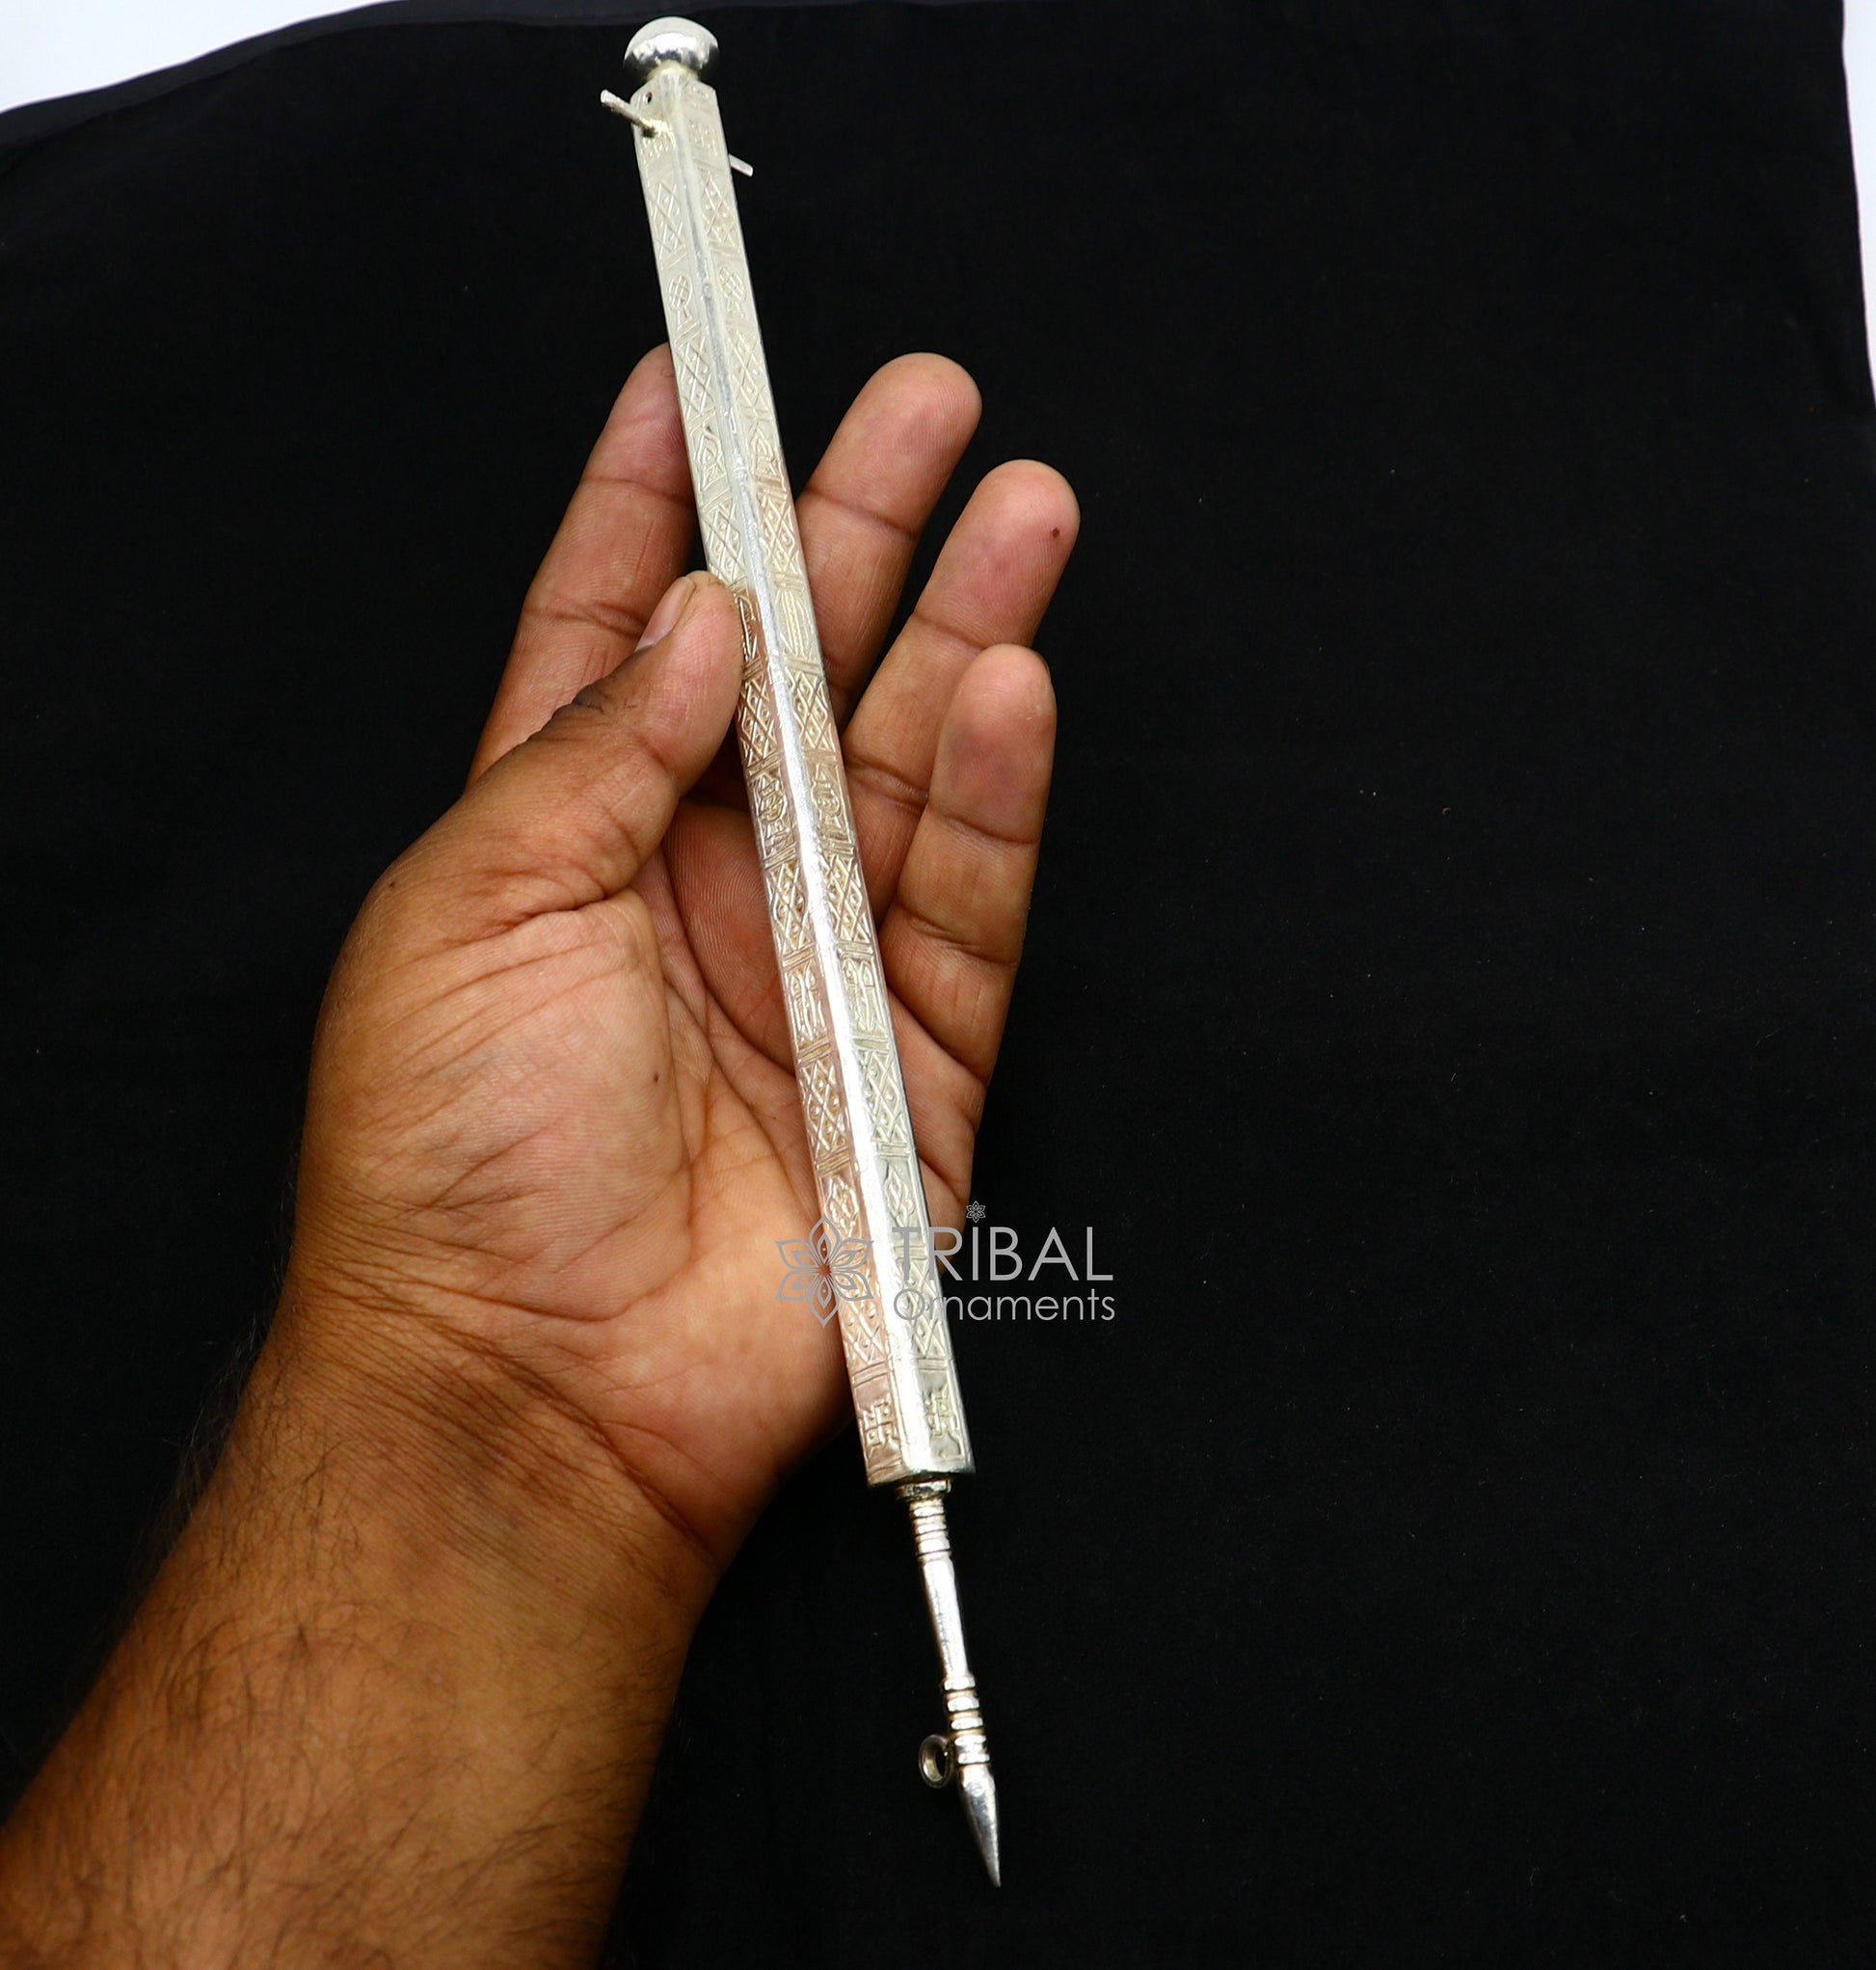 11" 925 sterling silver handmade Jain Sthapnaji stick for puja or praying to gold. amazing unique silver article from india su1110 - TRIBAL ORNAMENTS